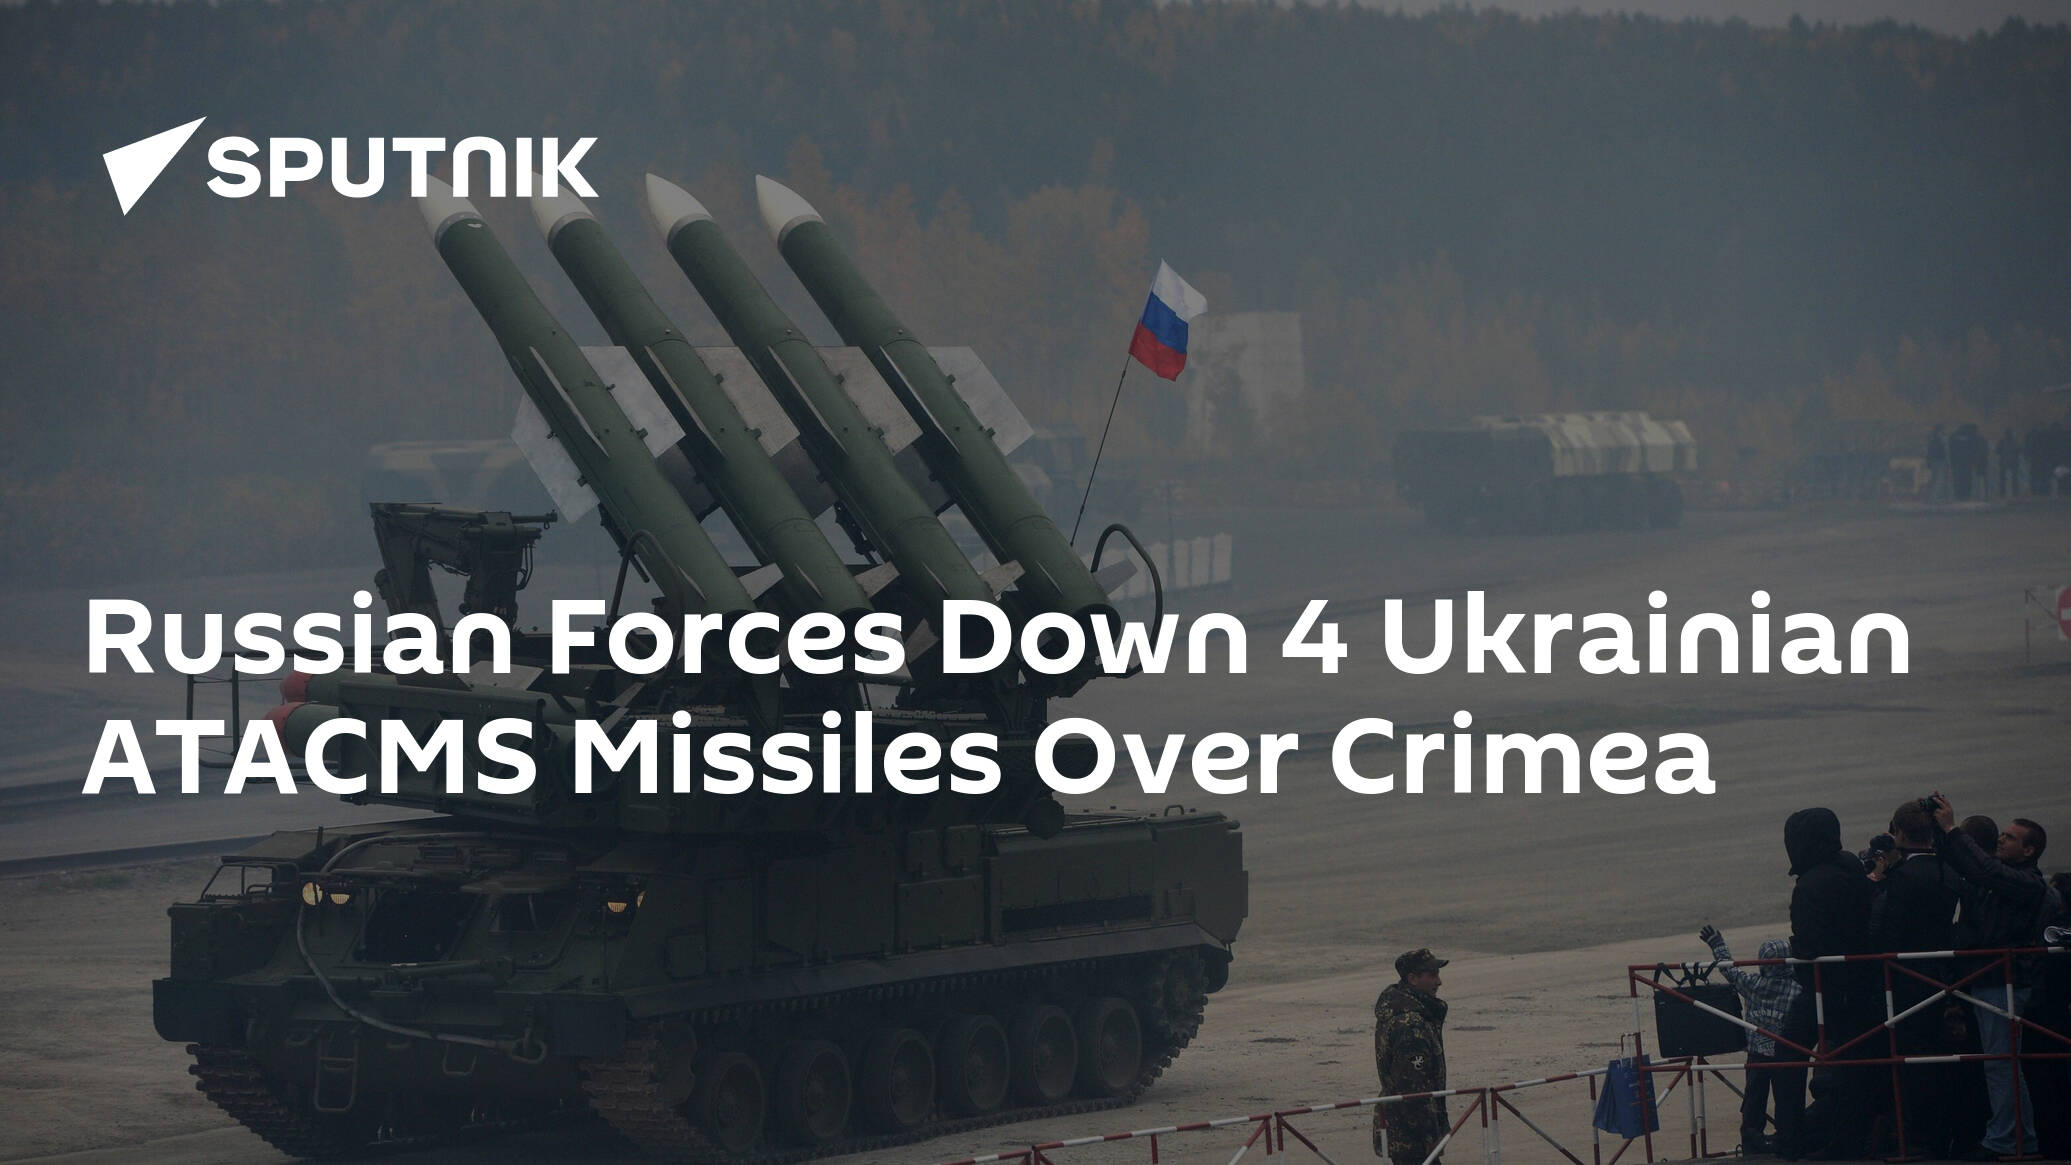 Russian Forces Down 4 Ukrainian ATACMS Missiles Over Crimea at Night